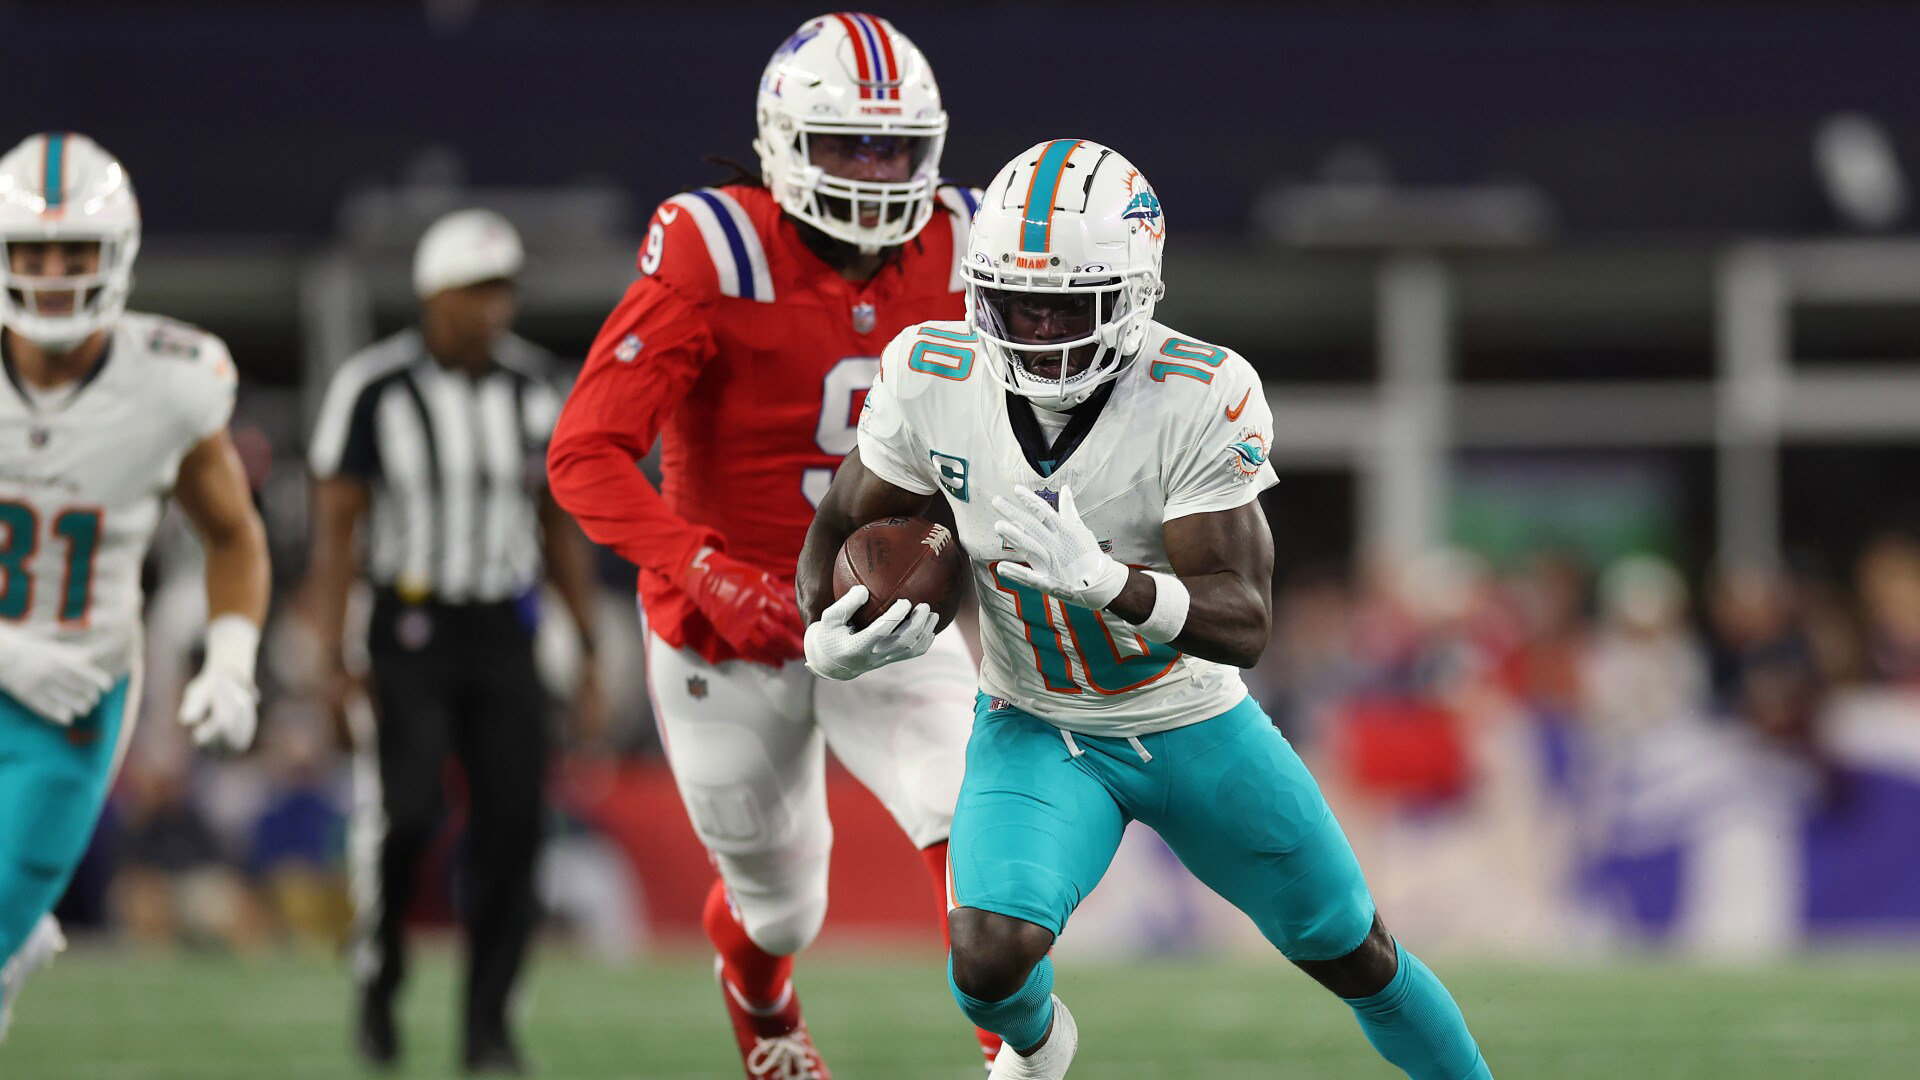 Tyreek Hill touchdown gives Dolphins 17-3 halftime lead over Patriots